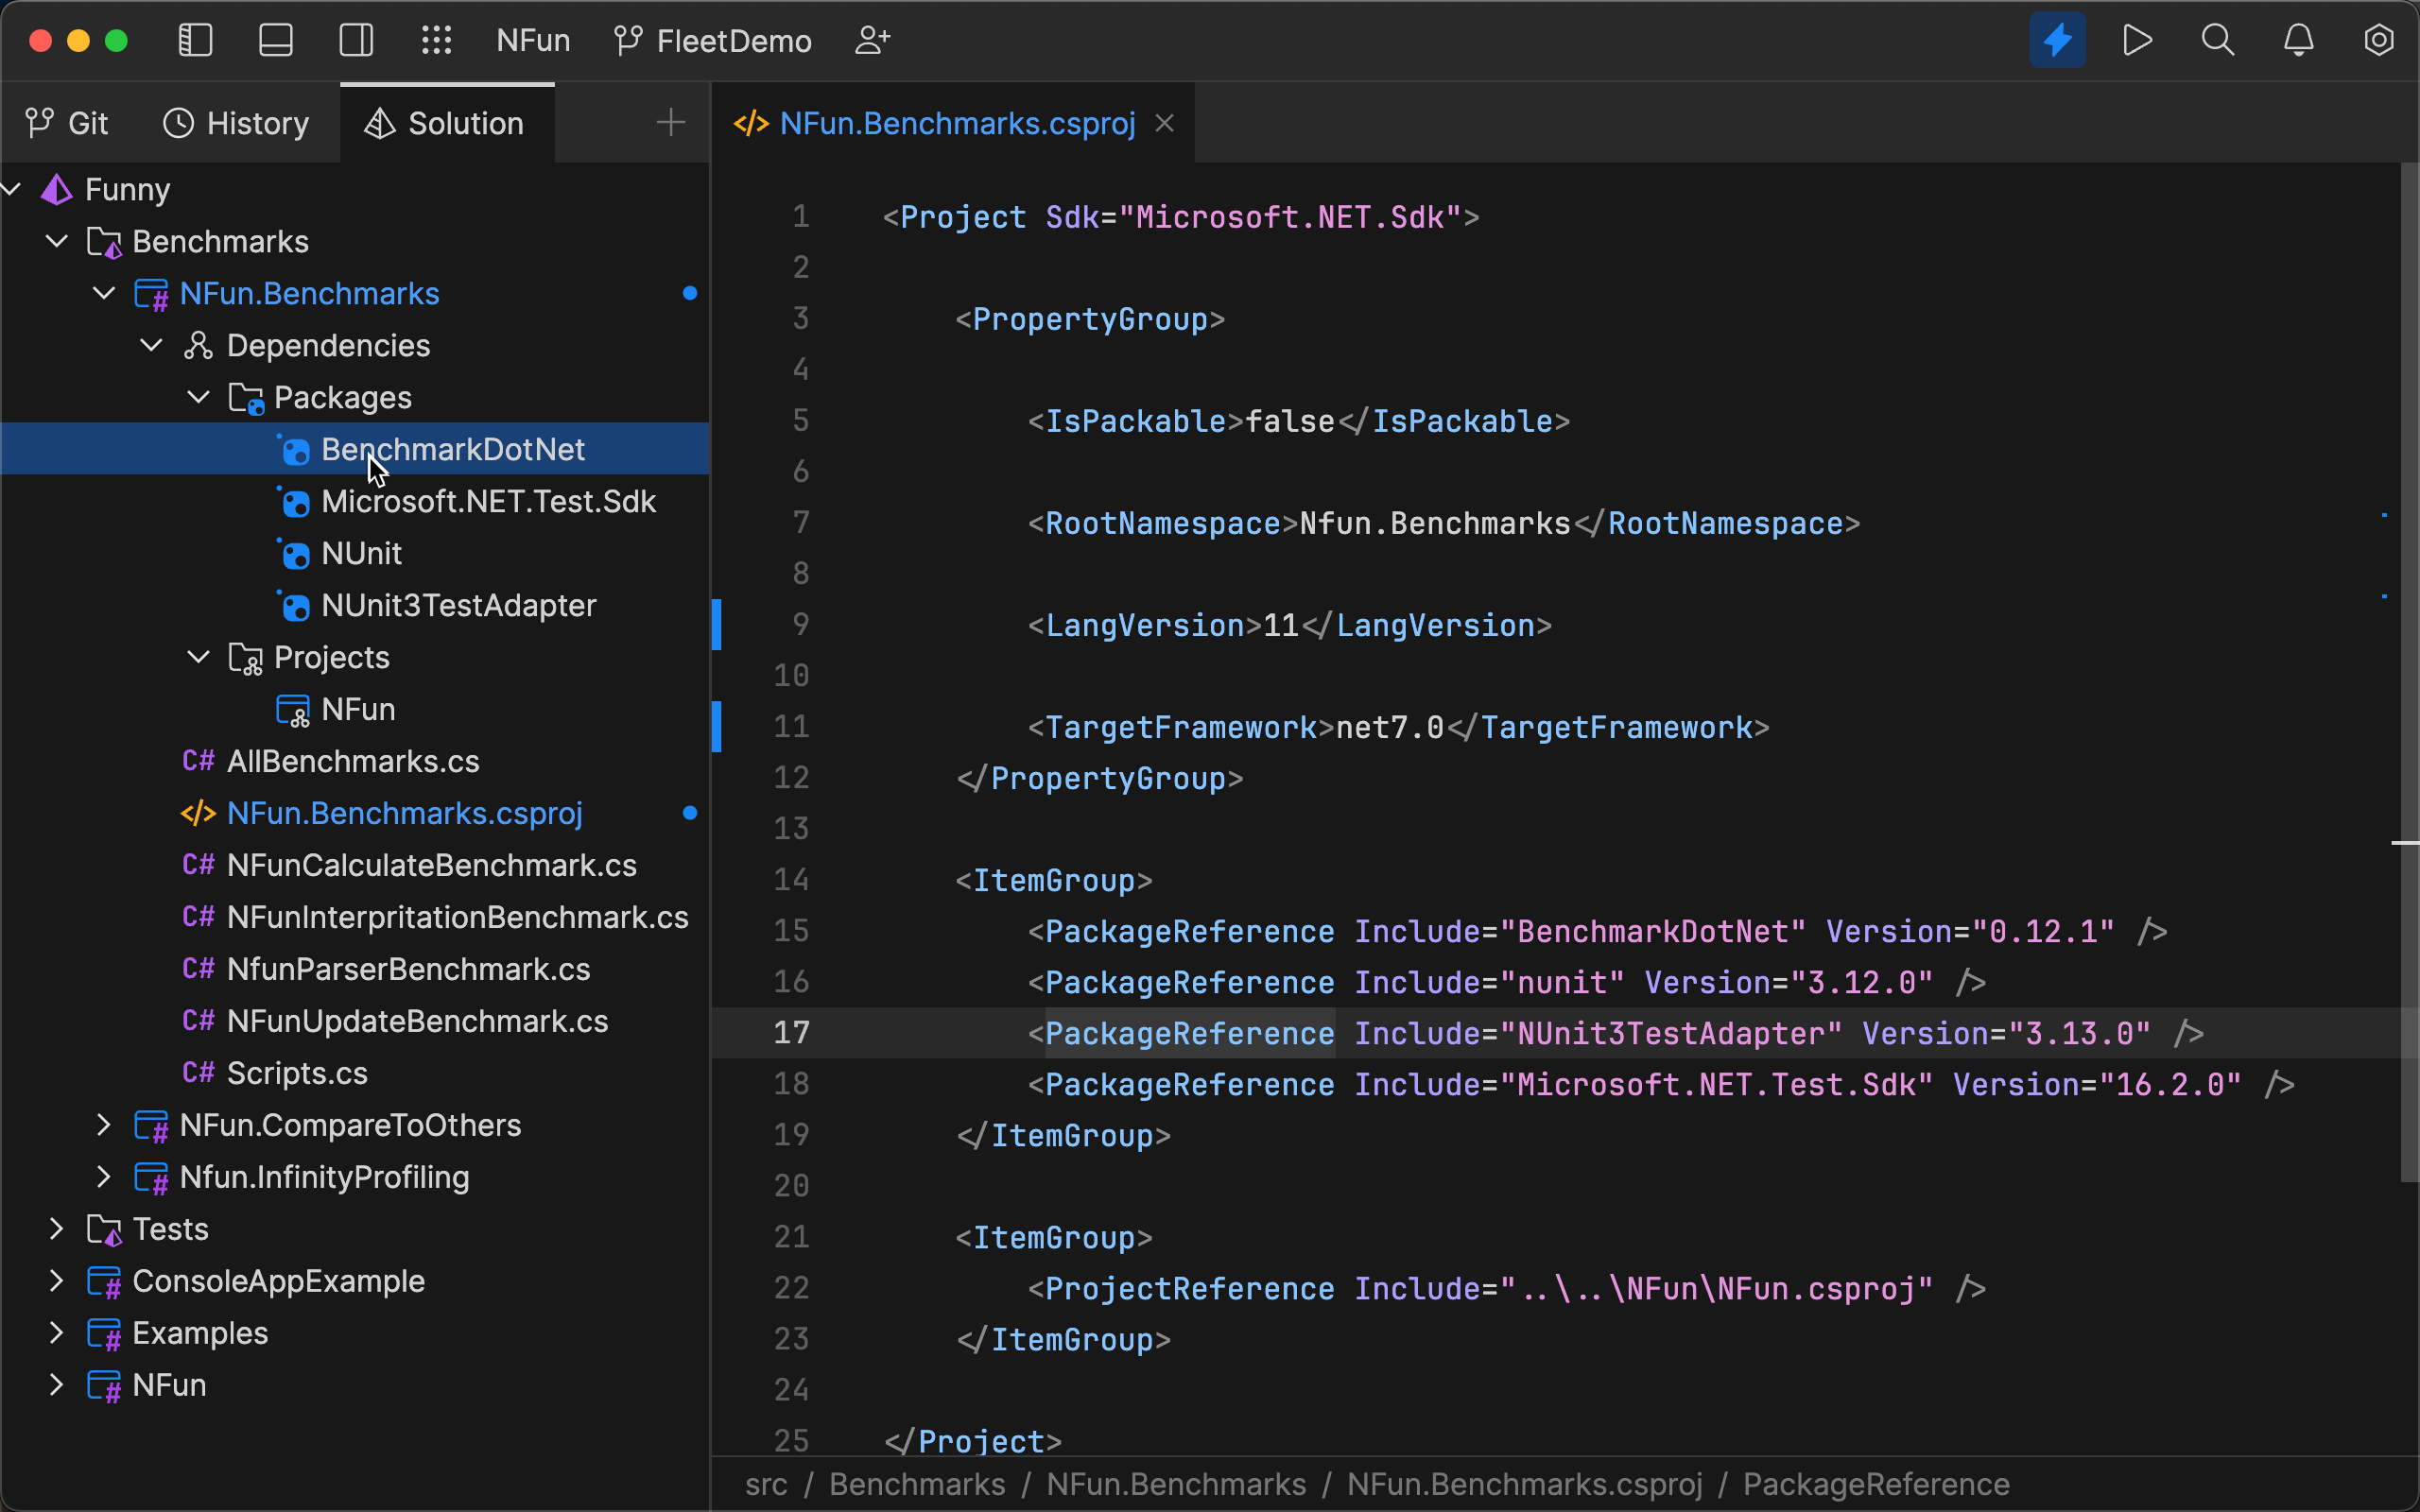 C# Support in Fleet: Solution View, Unit Testing, and More!